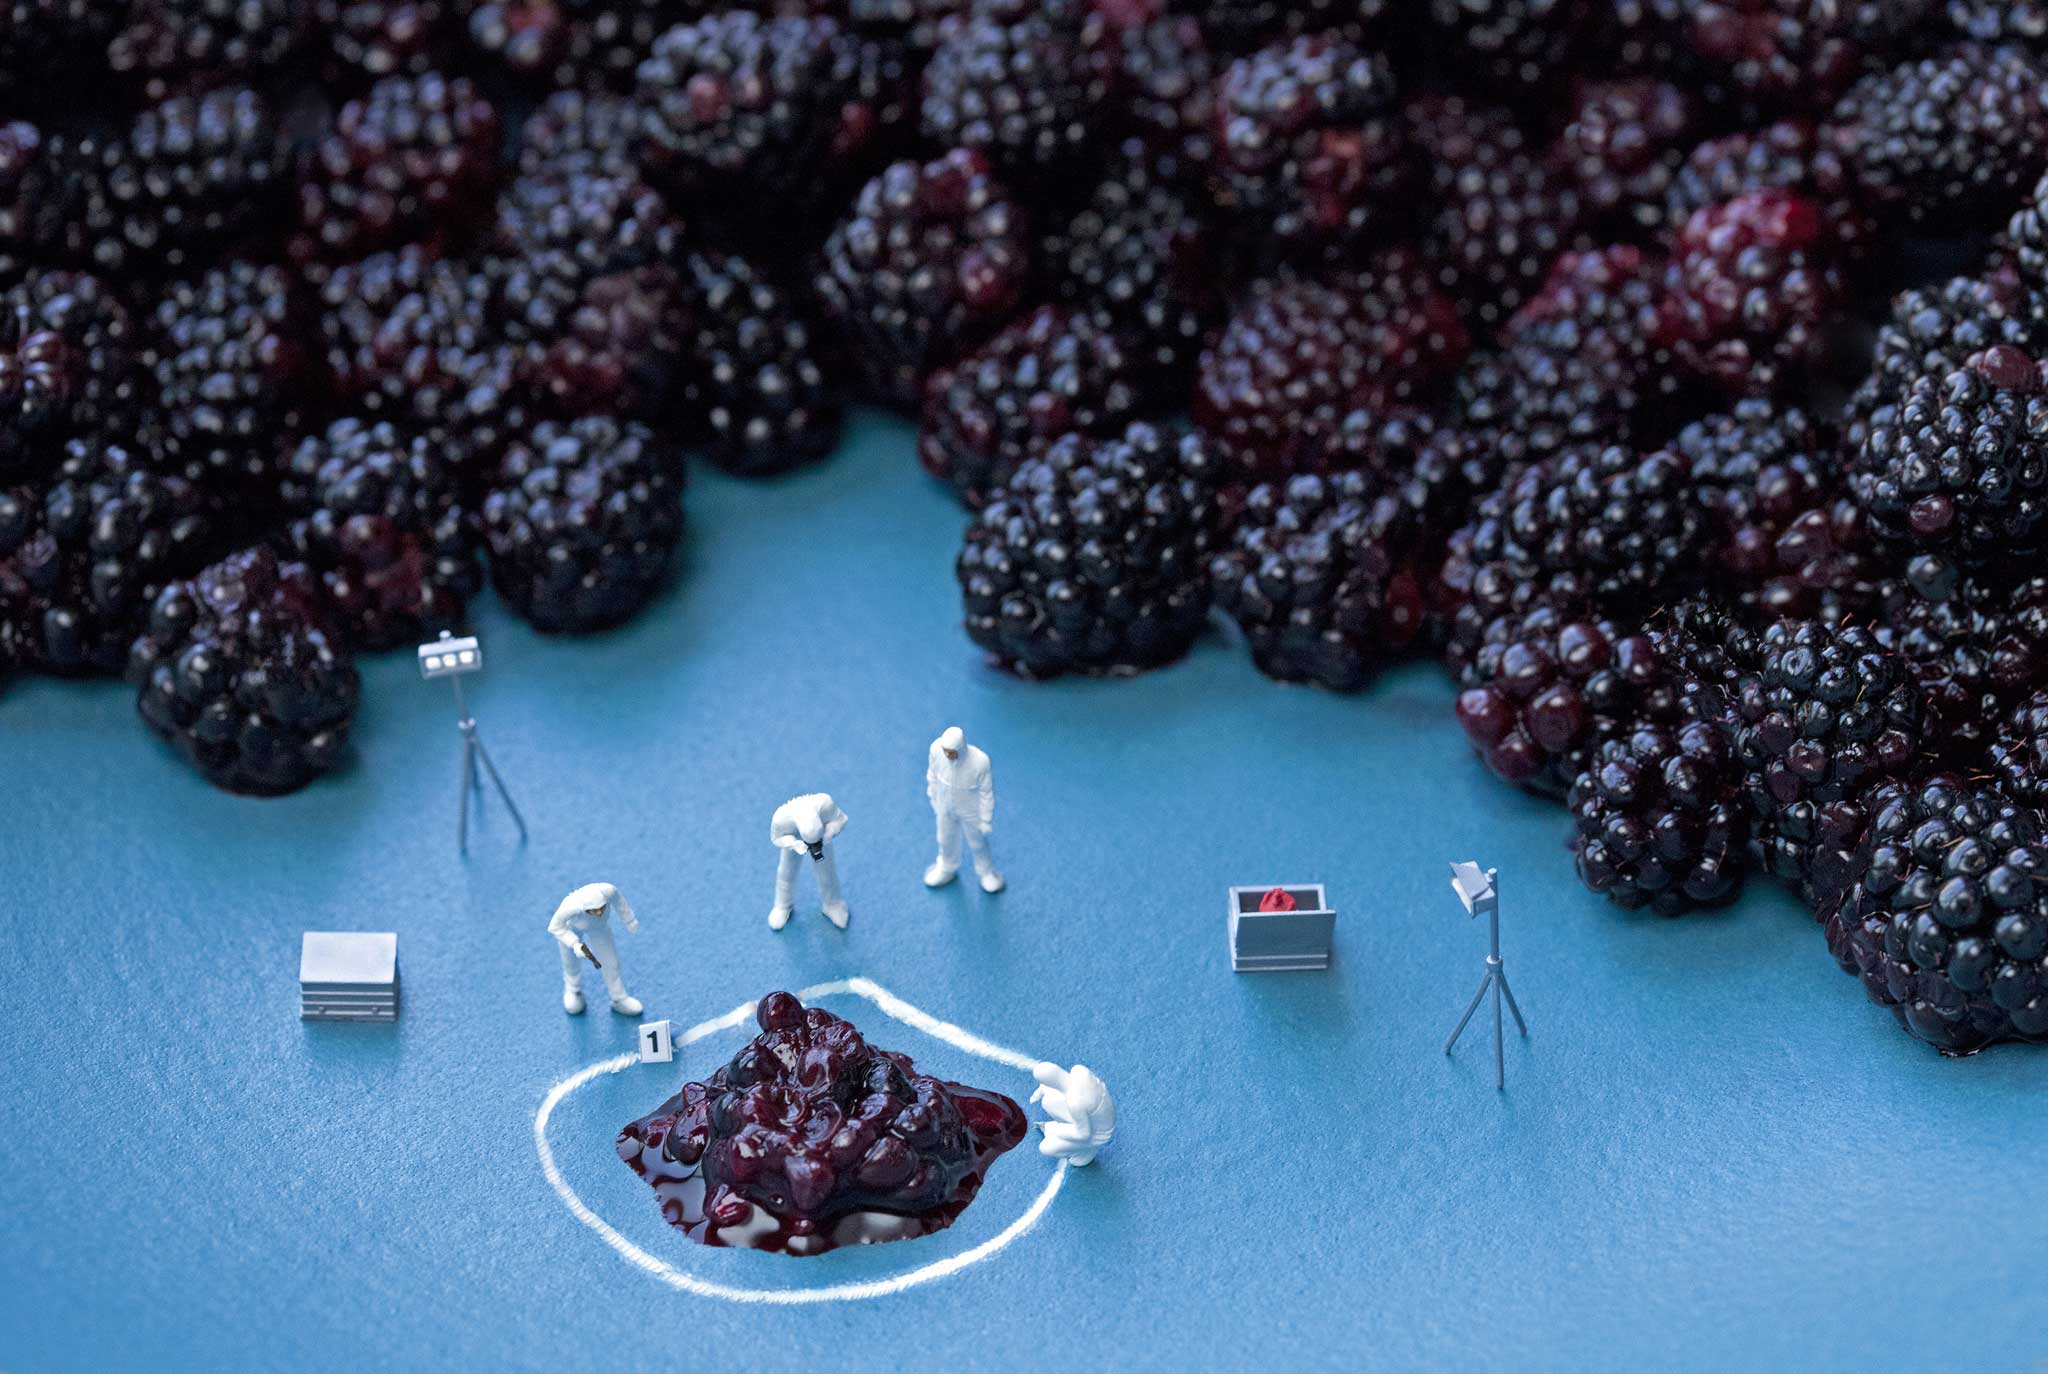 'Squashed berries gave me the idea for a victim and a crime scene'